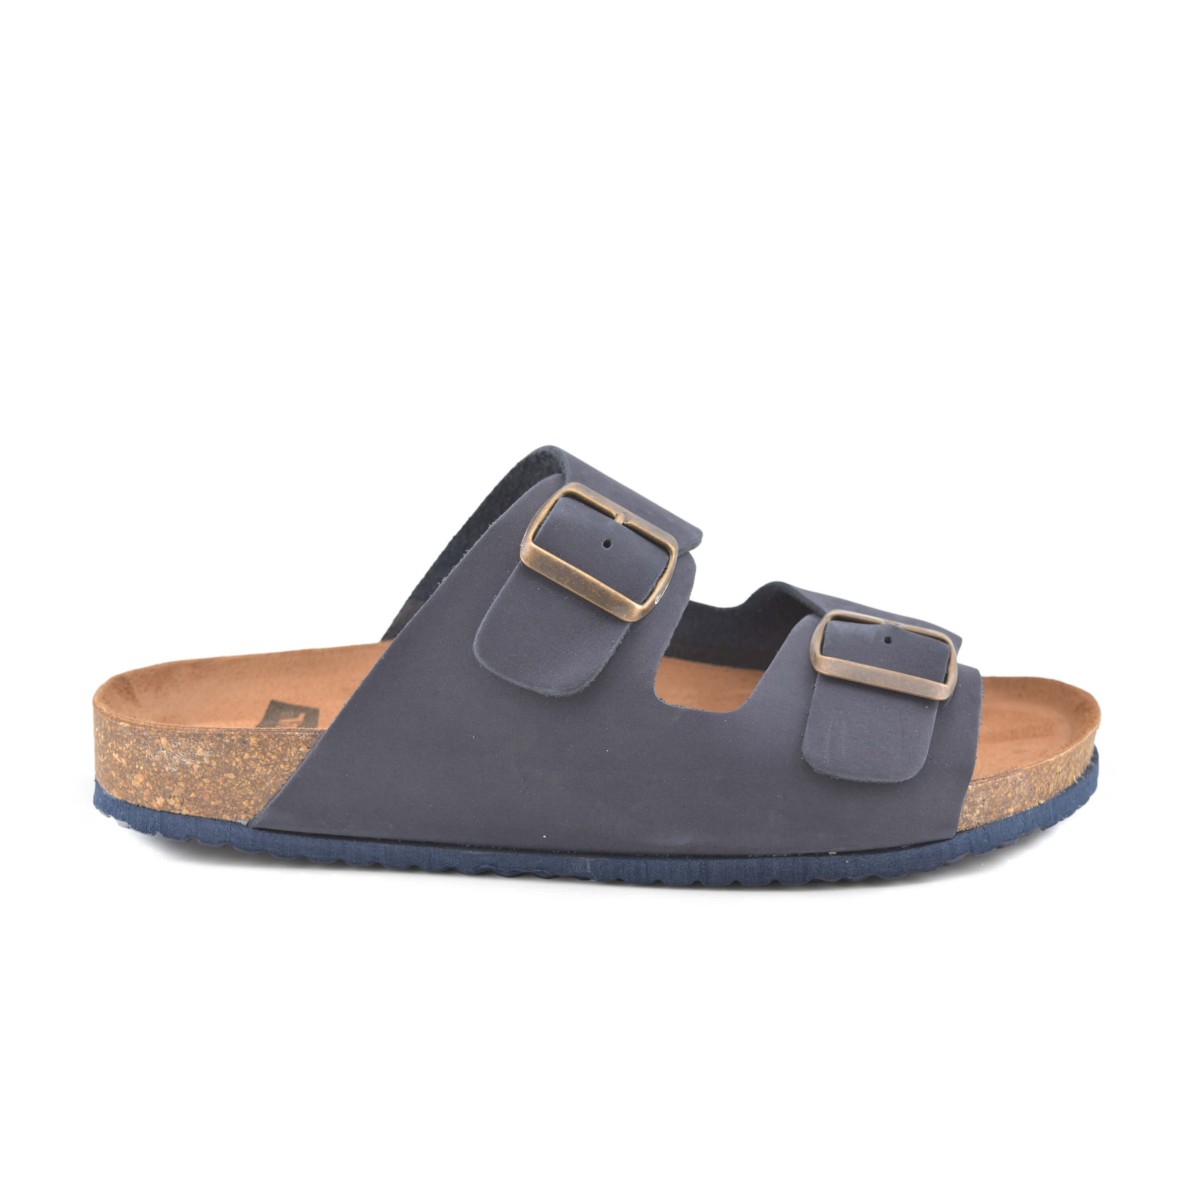 Bio men's sandals in blue leather by Casual